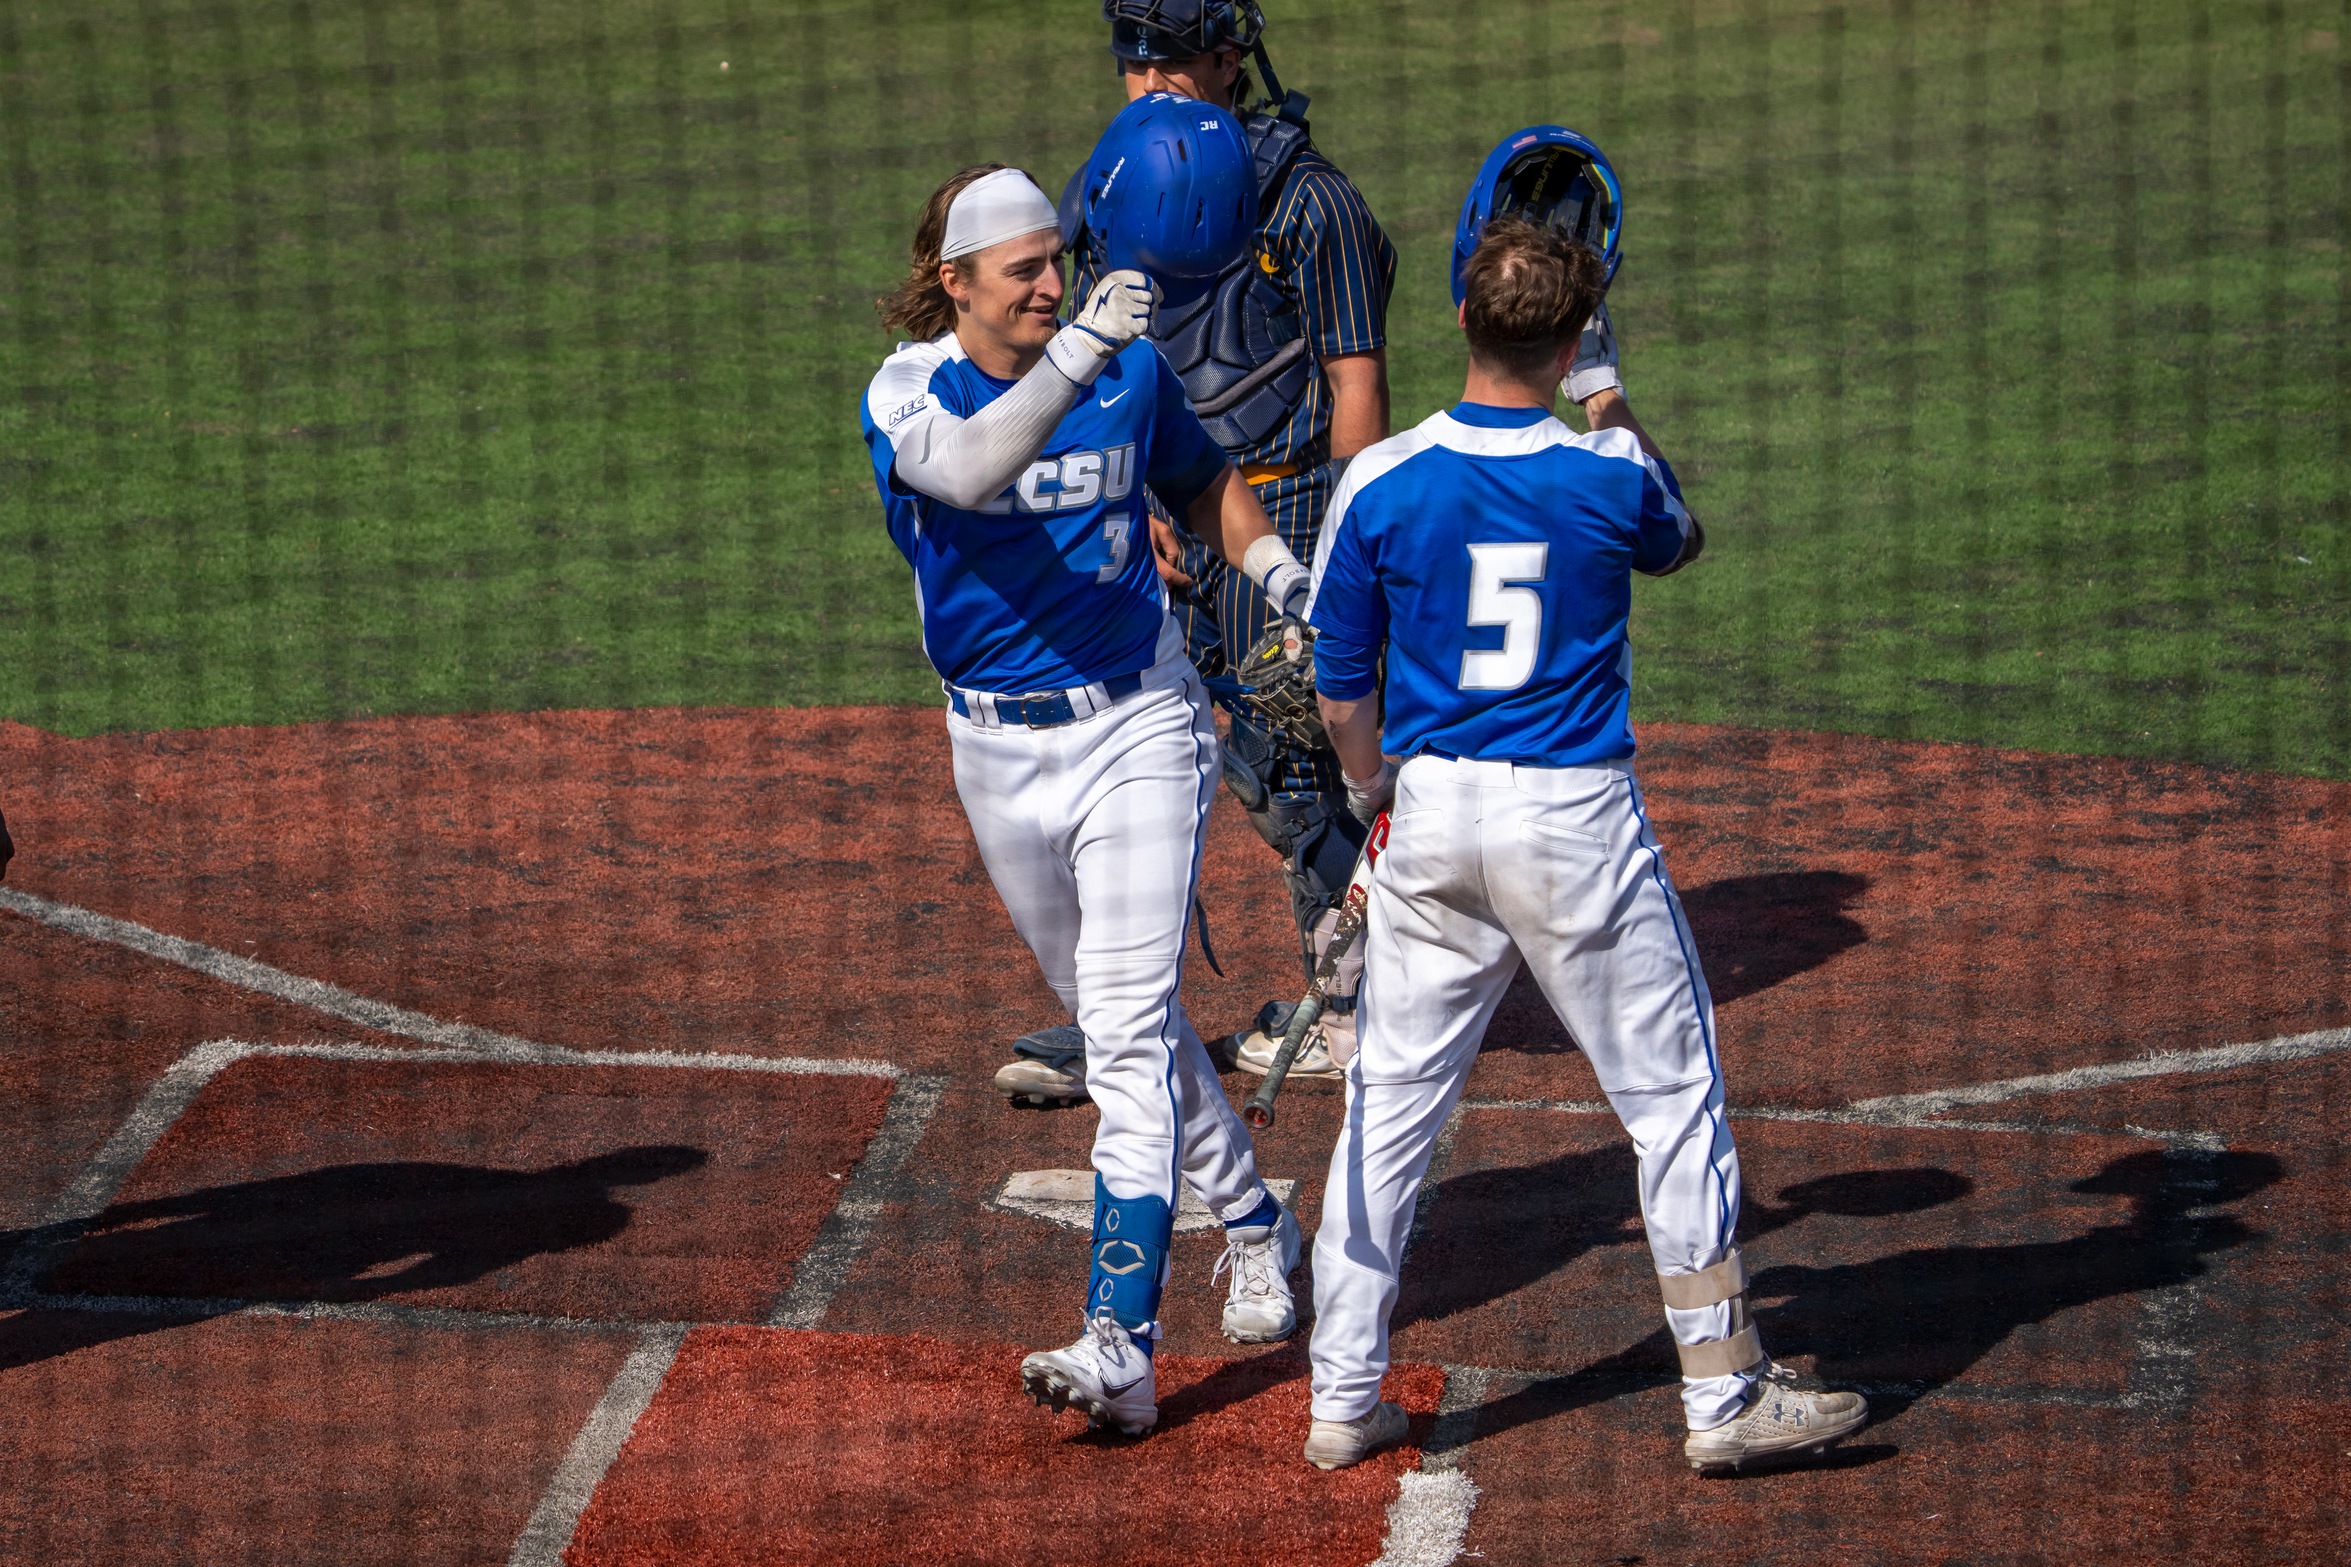 The Blue Devils did not allow a run after the first inning in Saturday's win. (Steve McLaughlin Photography)